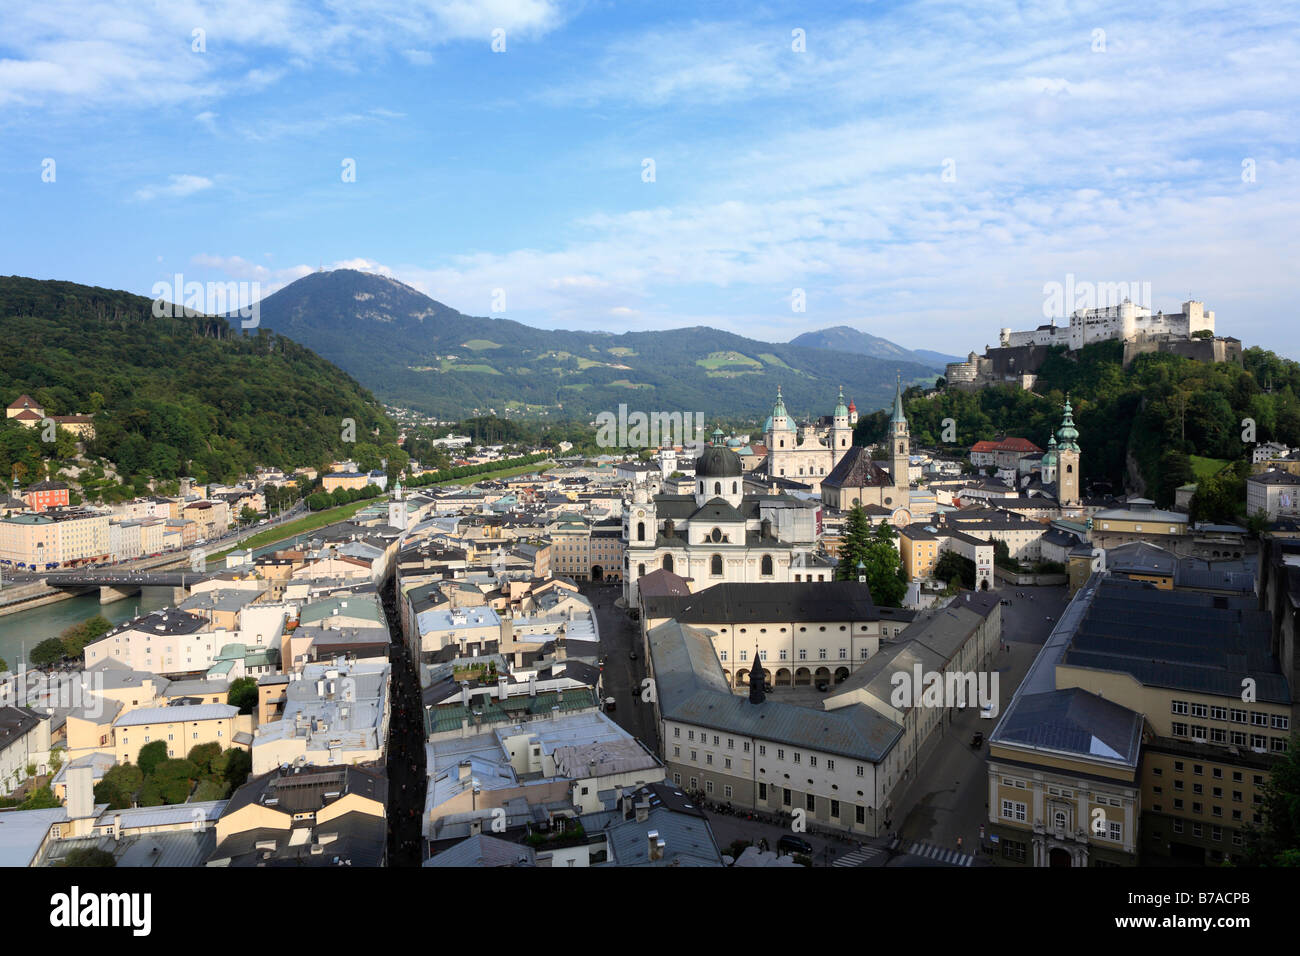 Historic district of Salzburg, Festung Hohensalzburg Fortress, view from Moenchsberg Hill, Humboldt-Terrace, Mt. Gaisberg in th Stock Photo